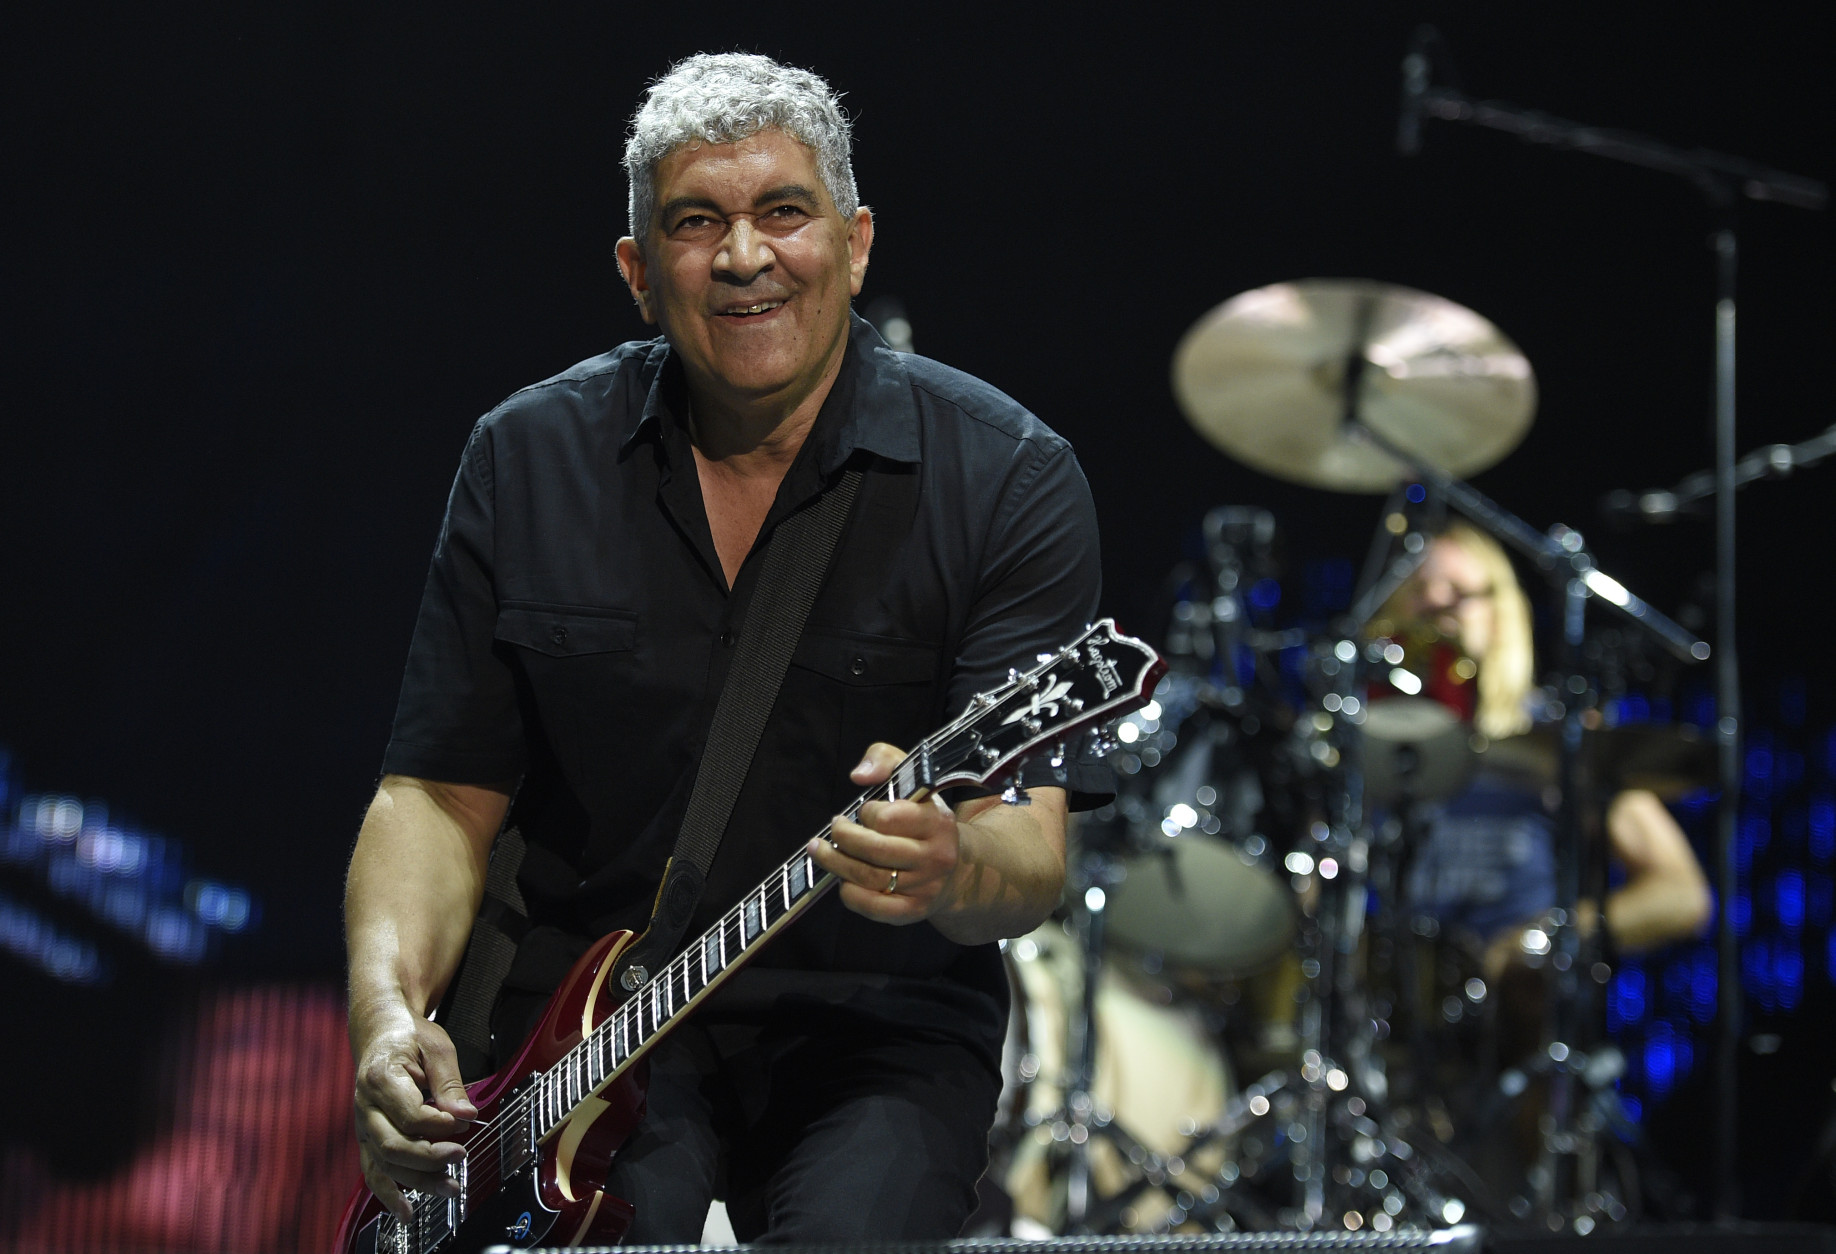 Guitarist Pat Smear of the Foo Fighters is 56 on Aug. 5. Here, Smear performs at RFK Stadium on Saturday, July 4, 2015, in Washington. (Photo by Nick Wass/Invision/AP)